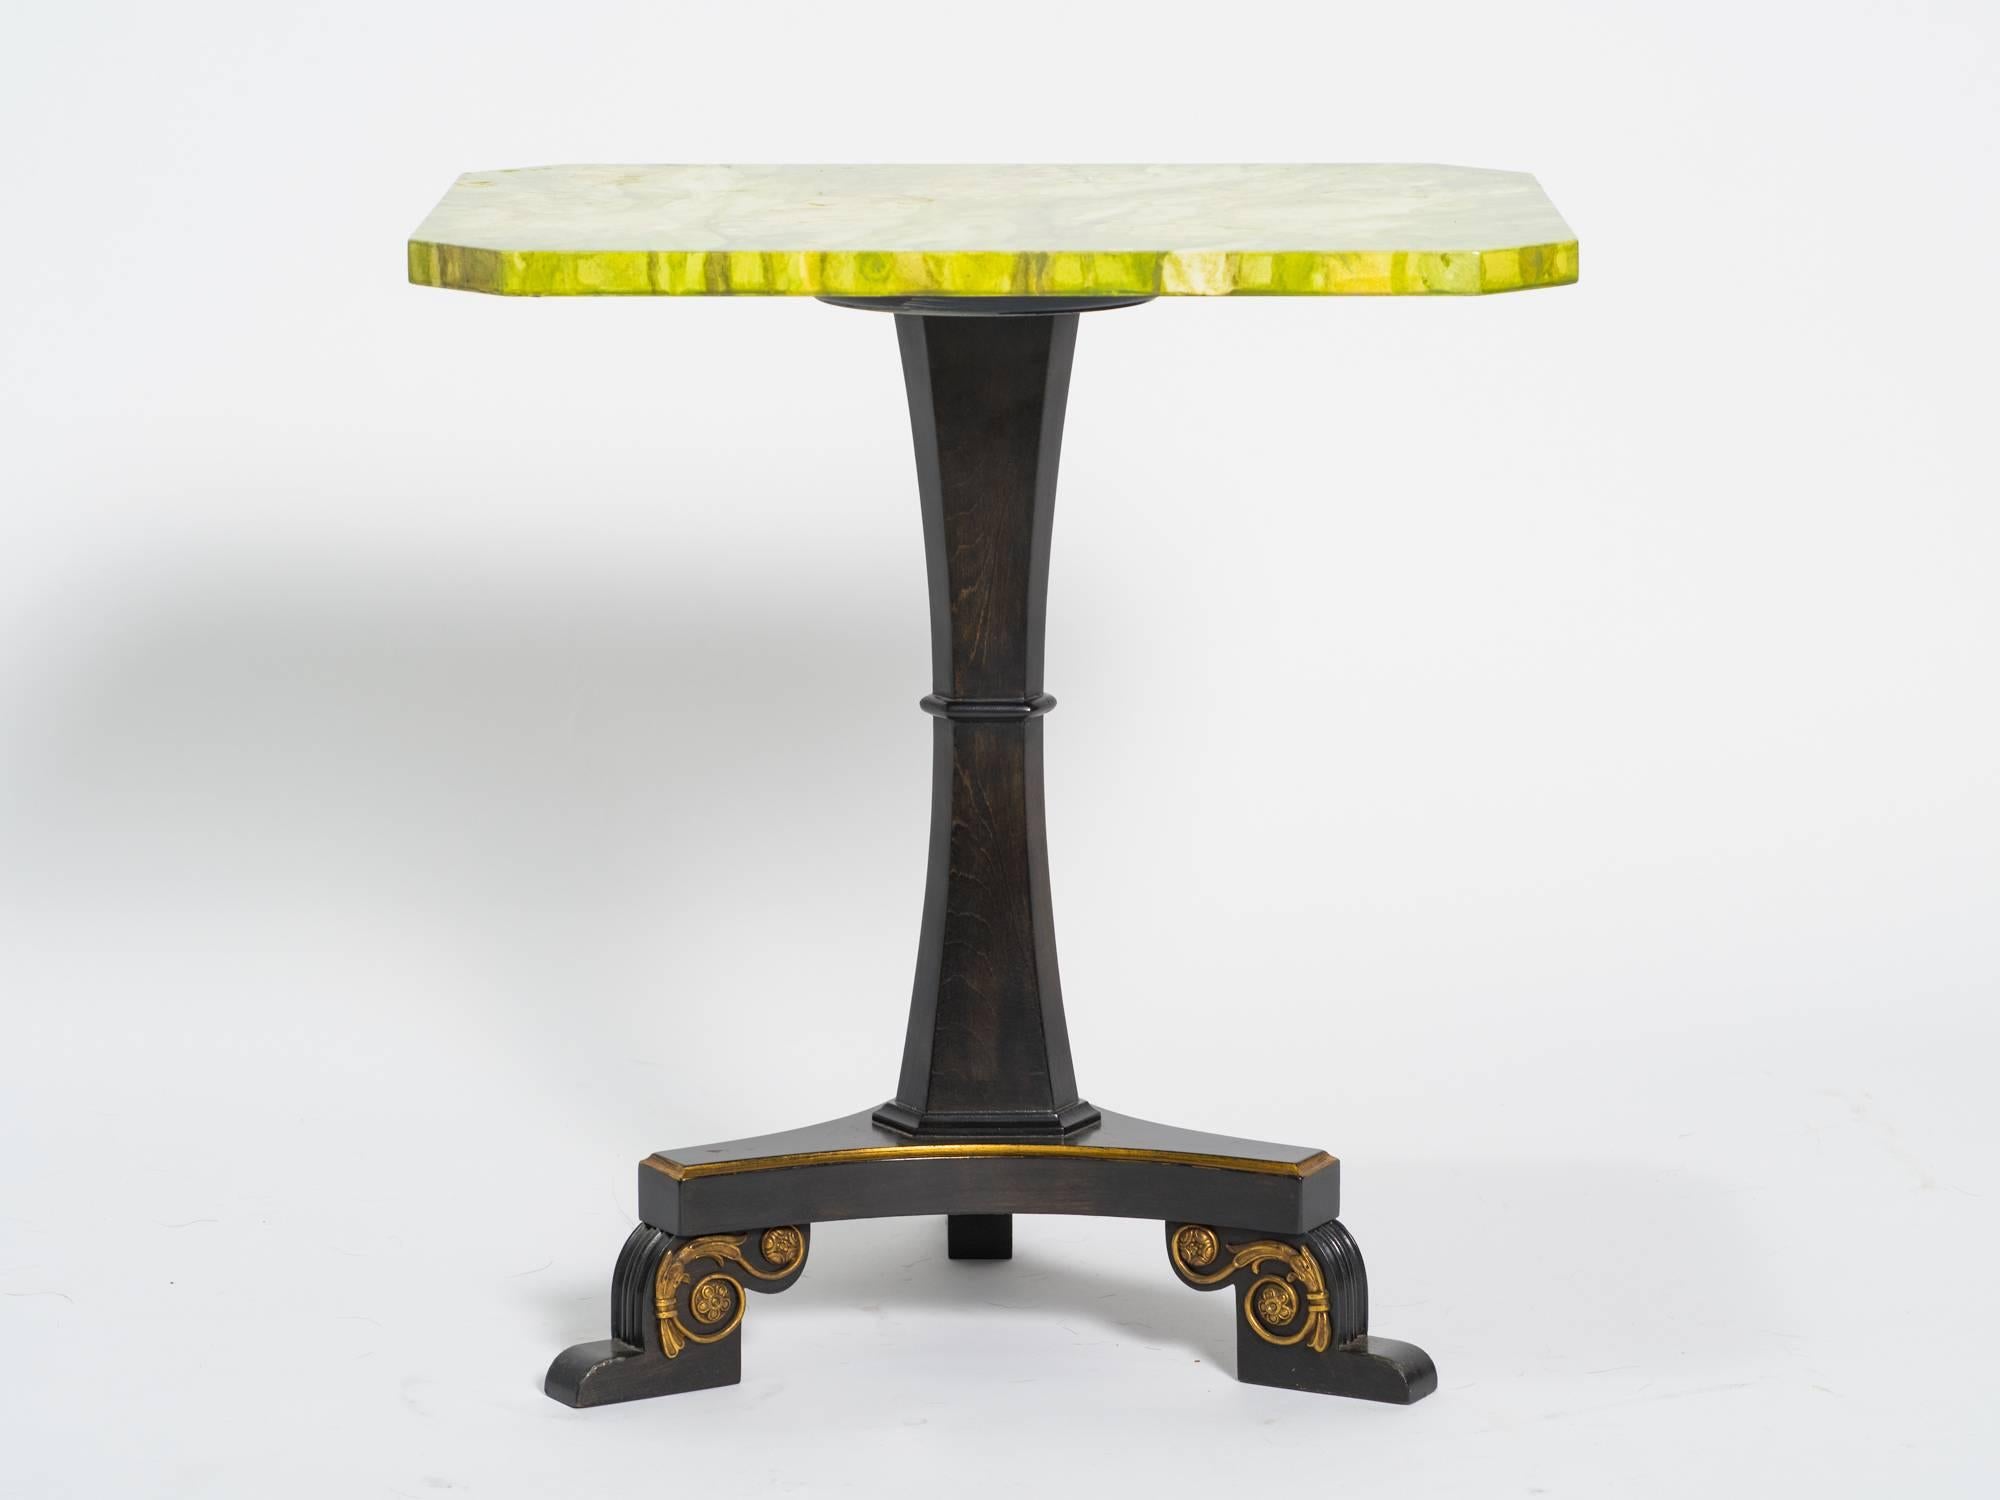 1950s painted faux marble classical side table made in Italy.